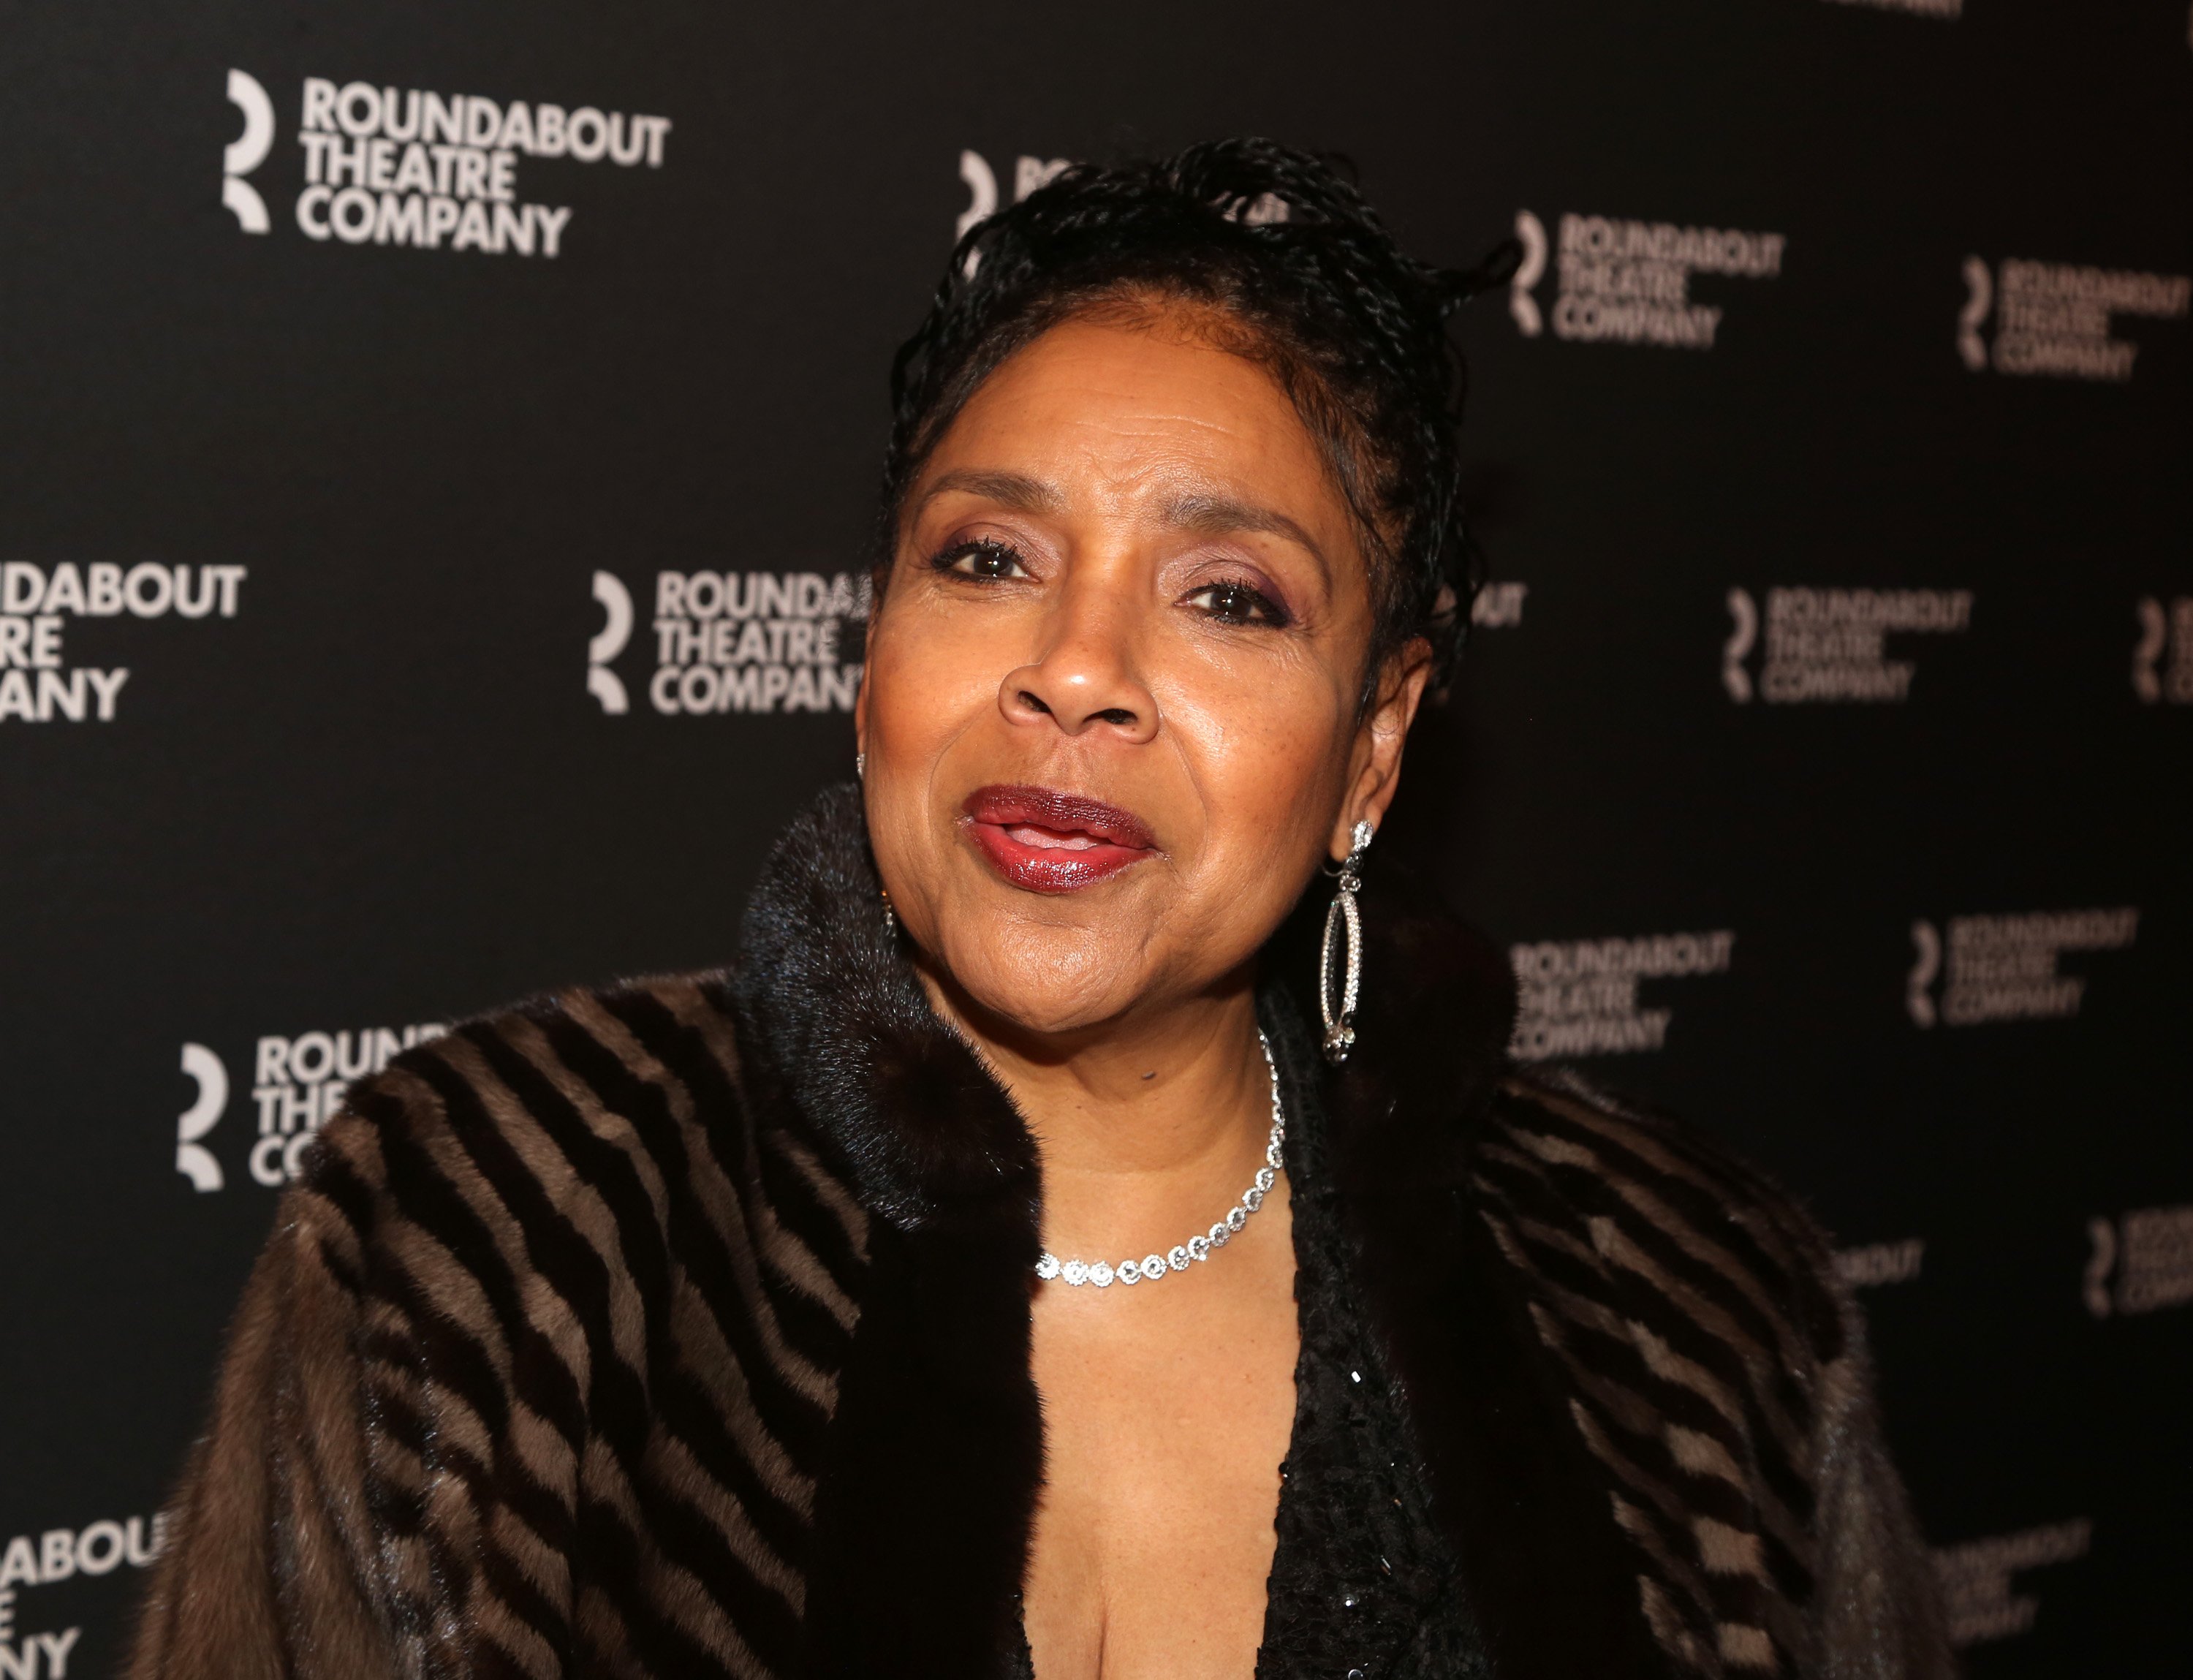 The Cosby Show star Phylicia Rashad